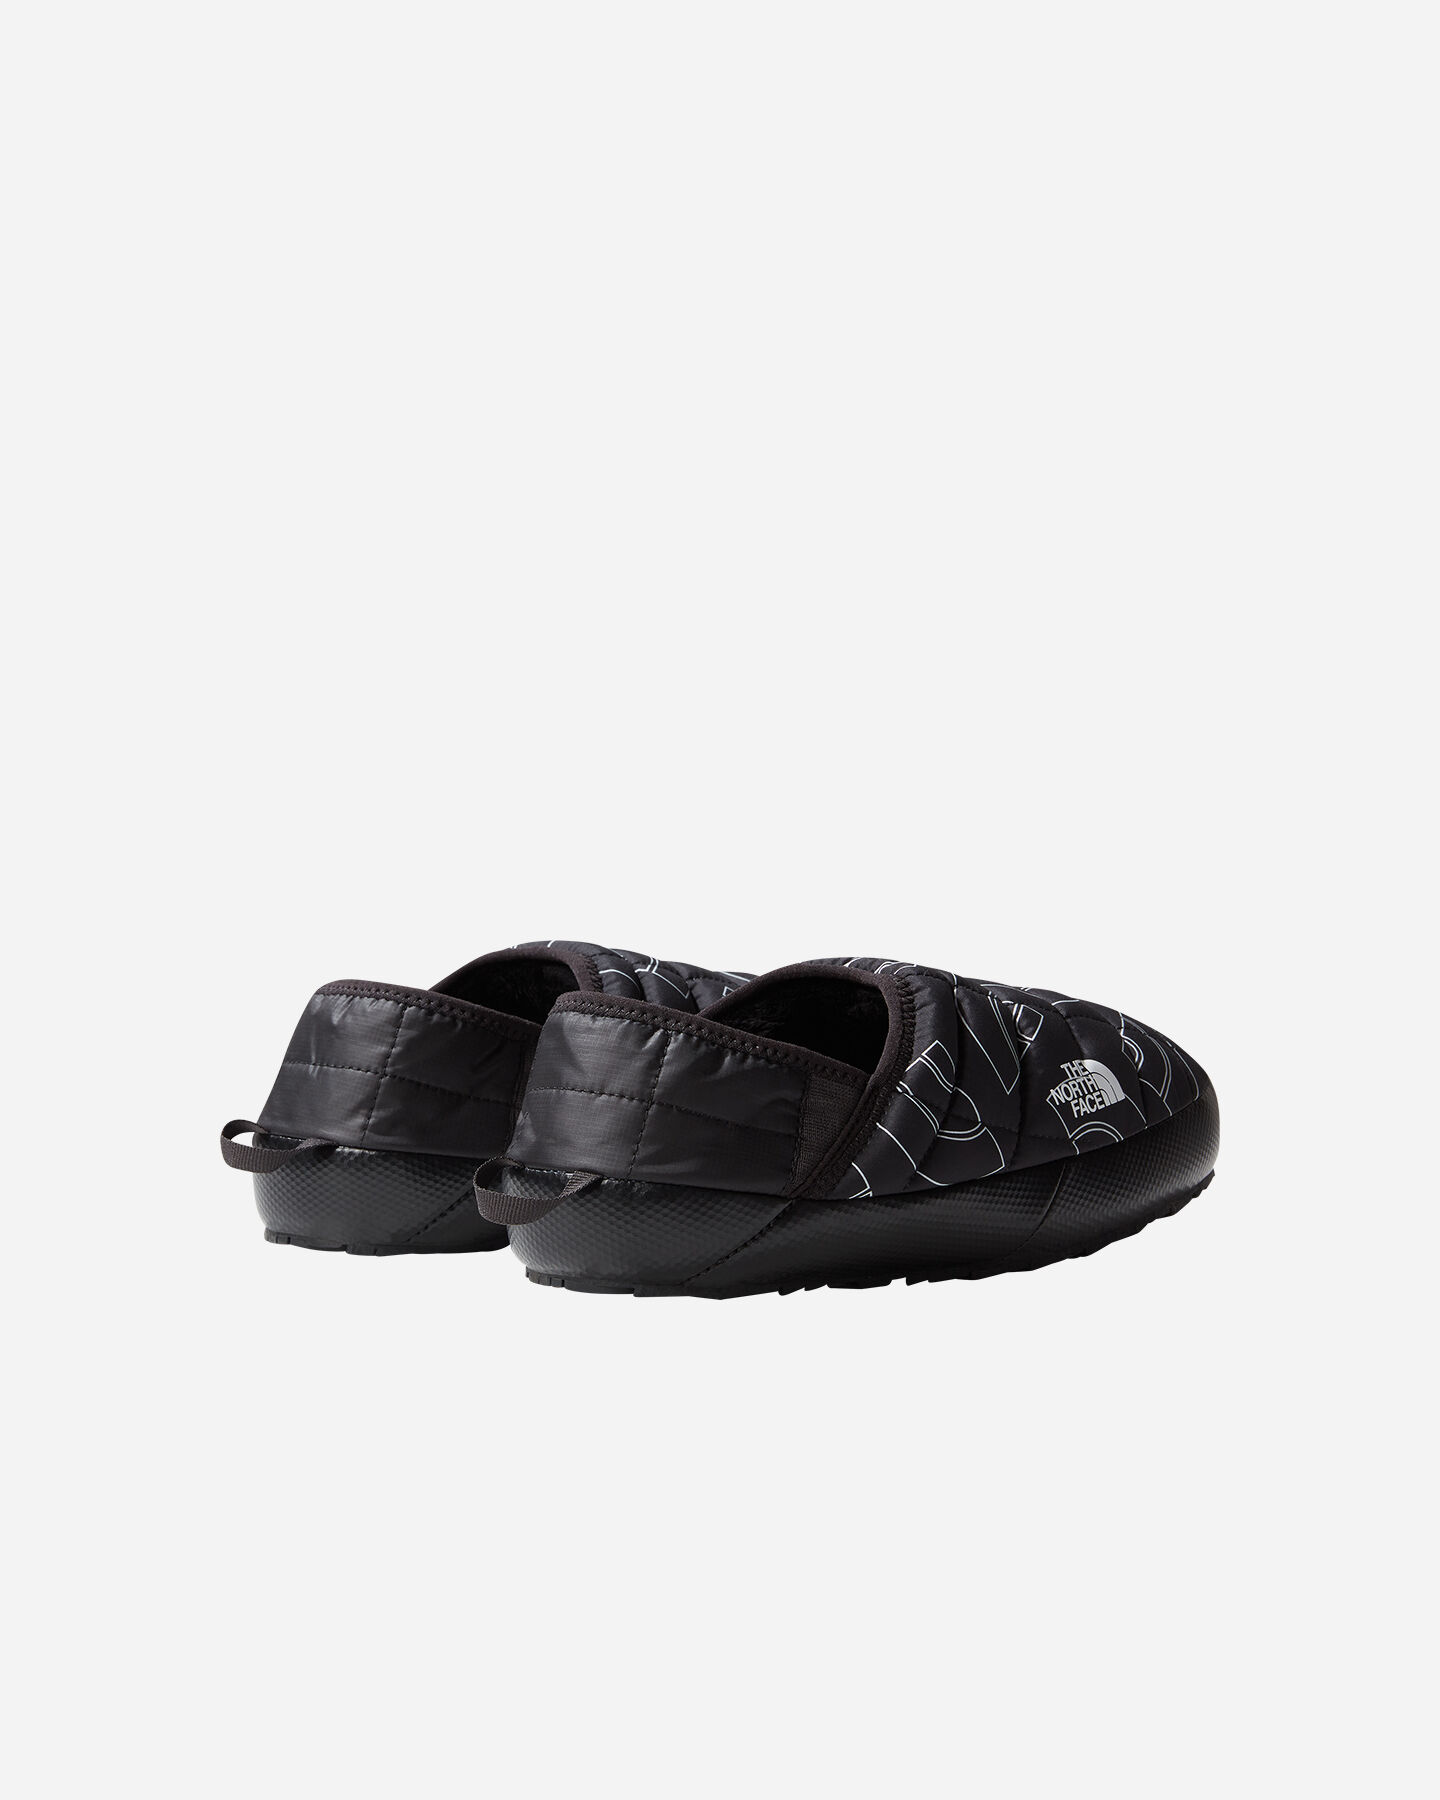  Ciabatte THE NORTH FACE THERMOBALL TRACTION MULE V M S5597595|OJS|12 scatto 4